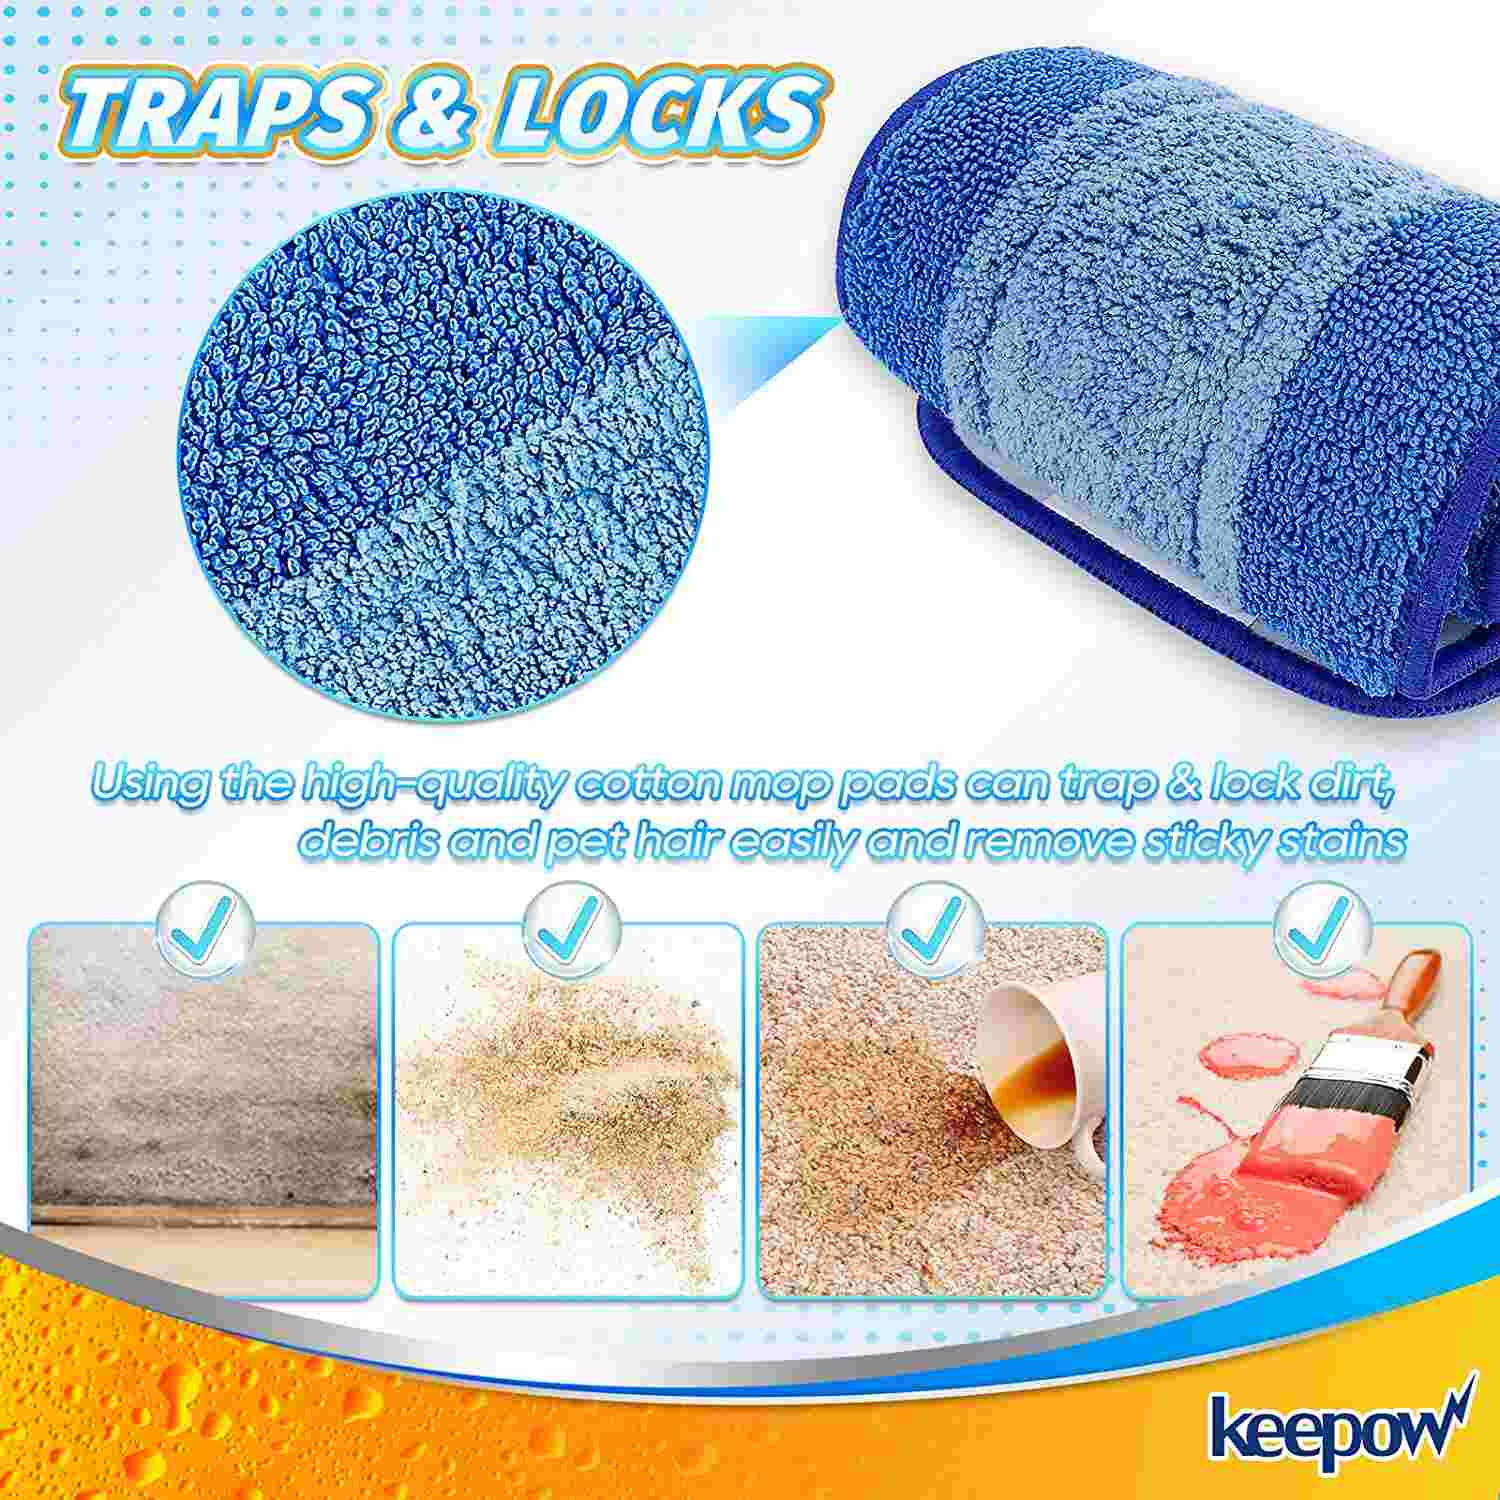 KEEPOW Washable & Reusable Microfiber Cleaning Pads for Bona Mop